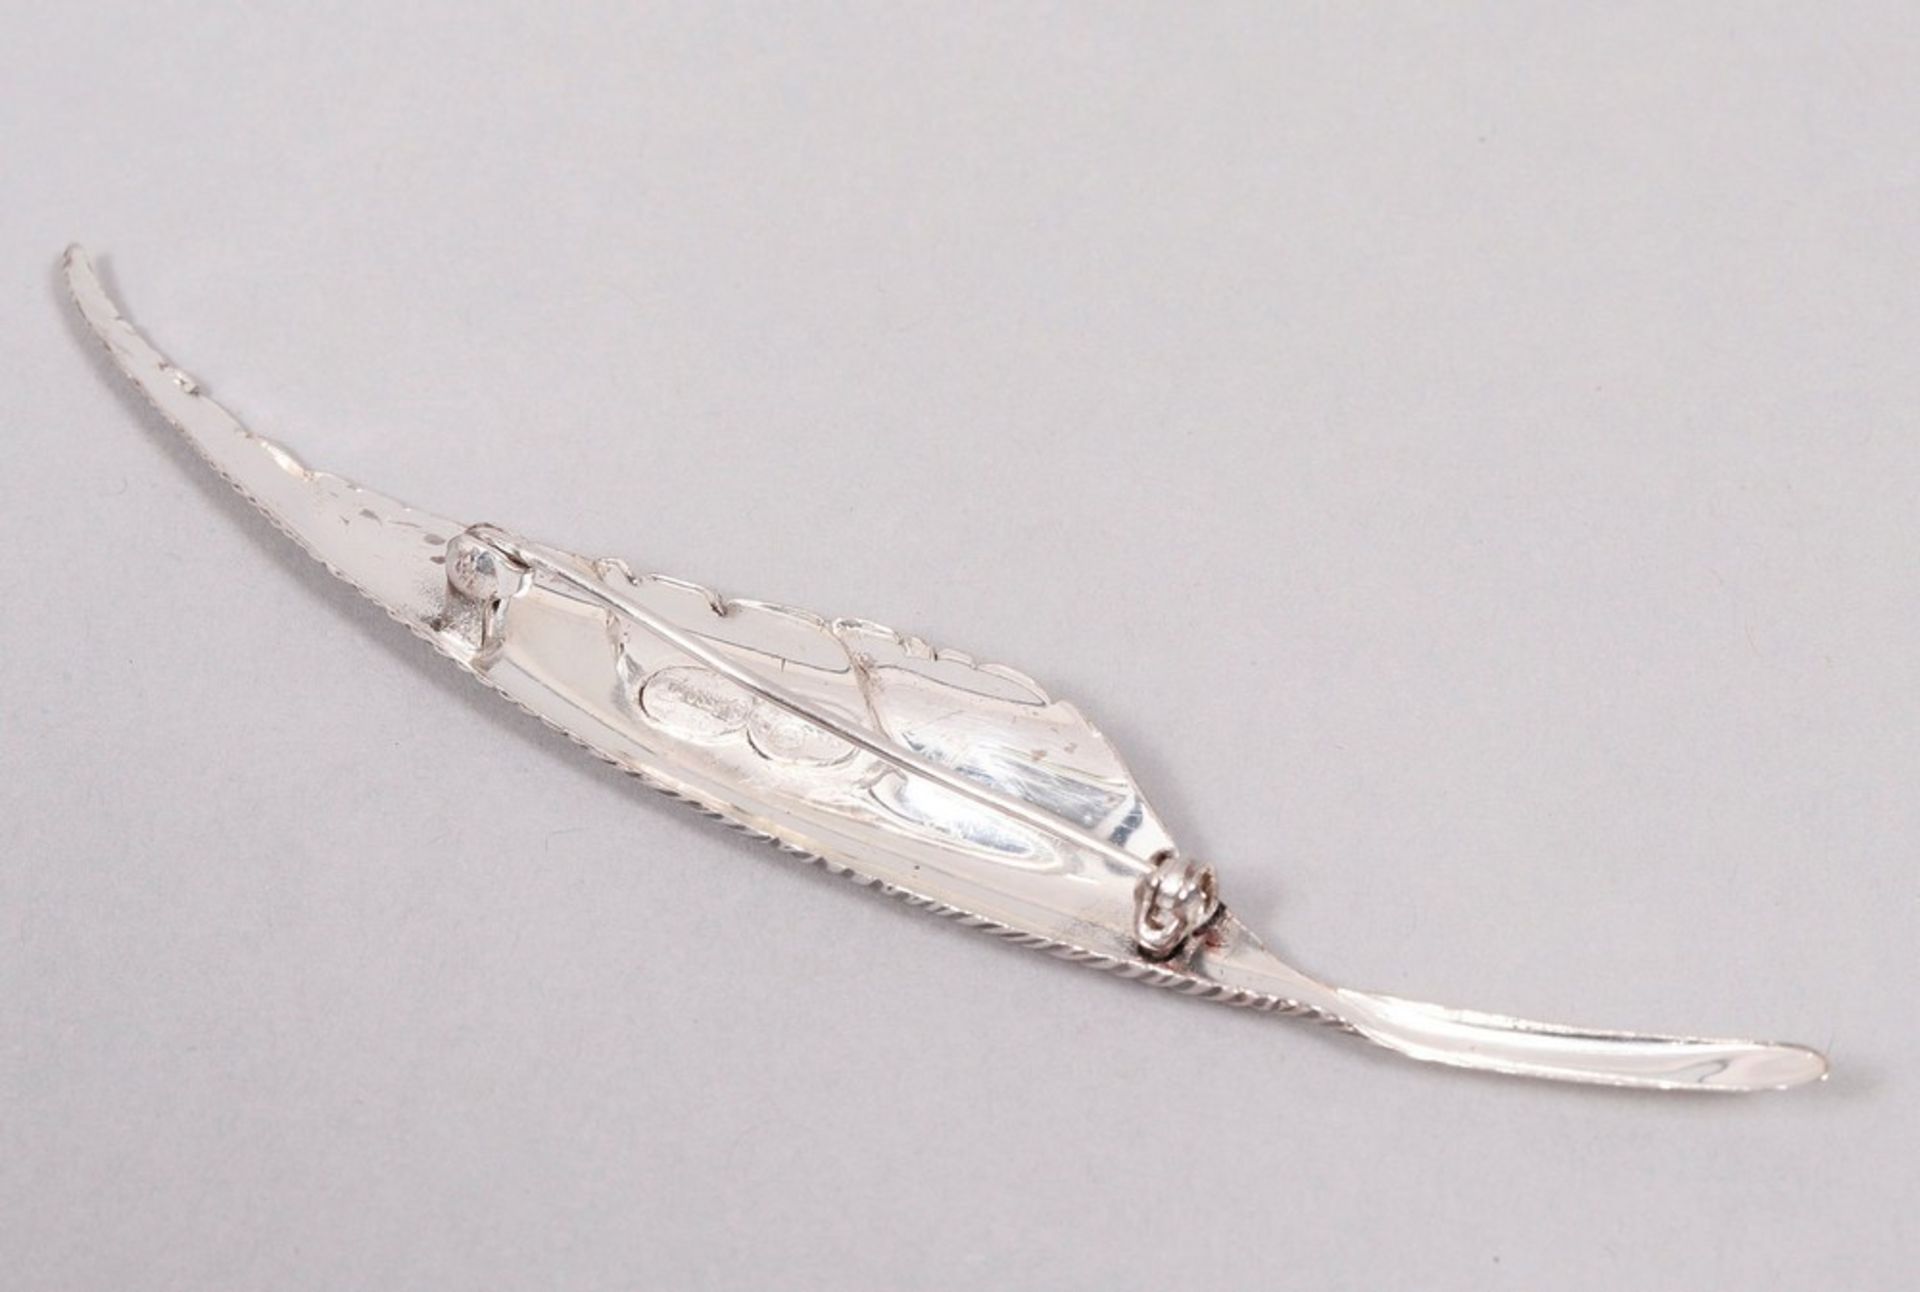 Feather-shaped brooch, 935 silver, maker Grosse (C) 1960 - Image 3 of 4